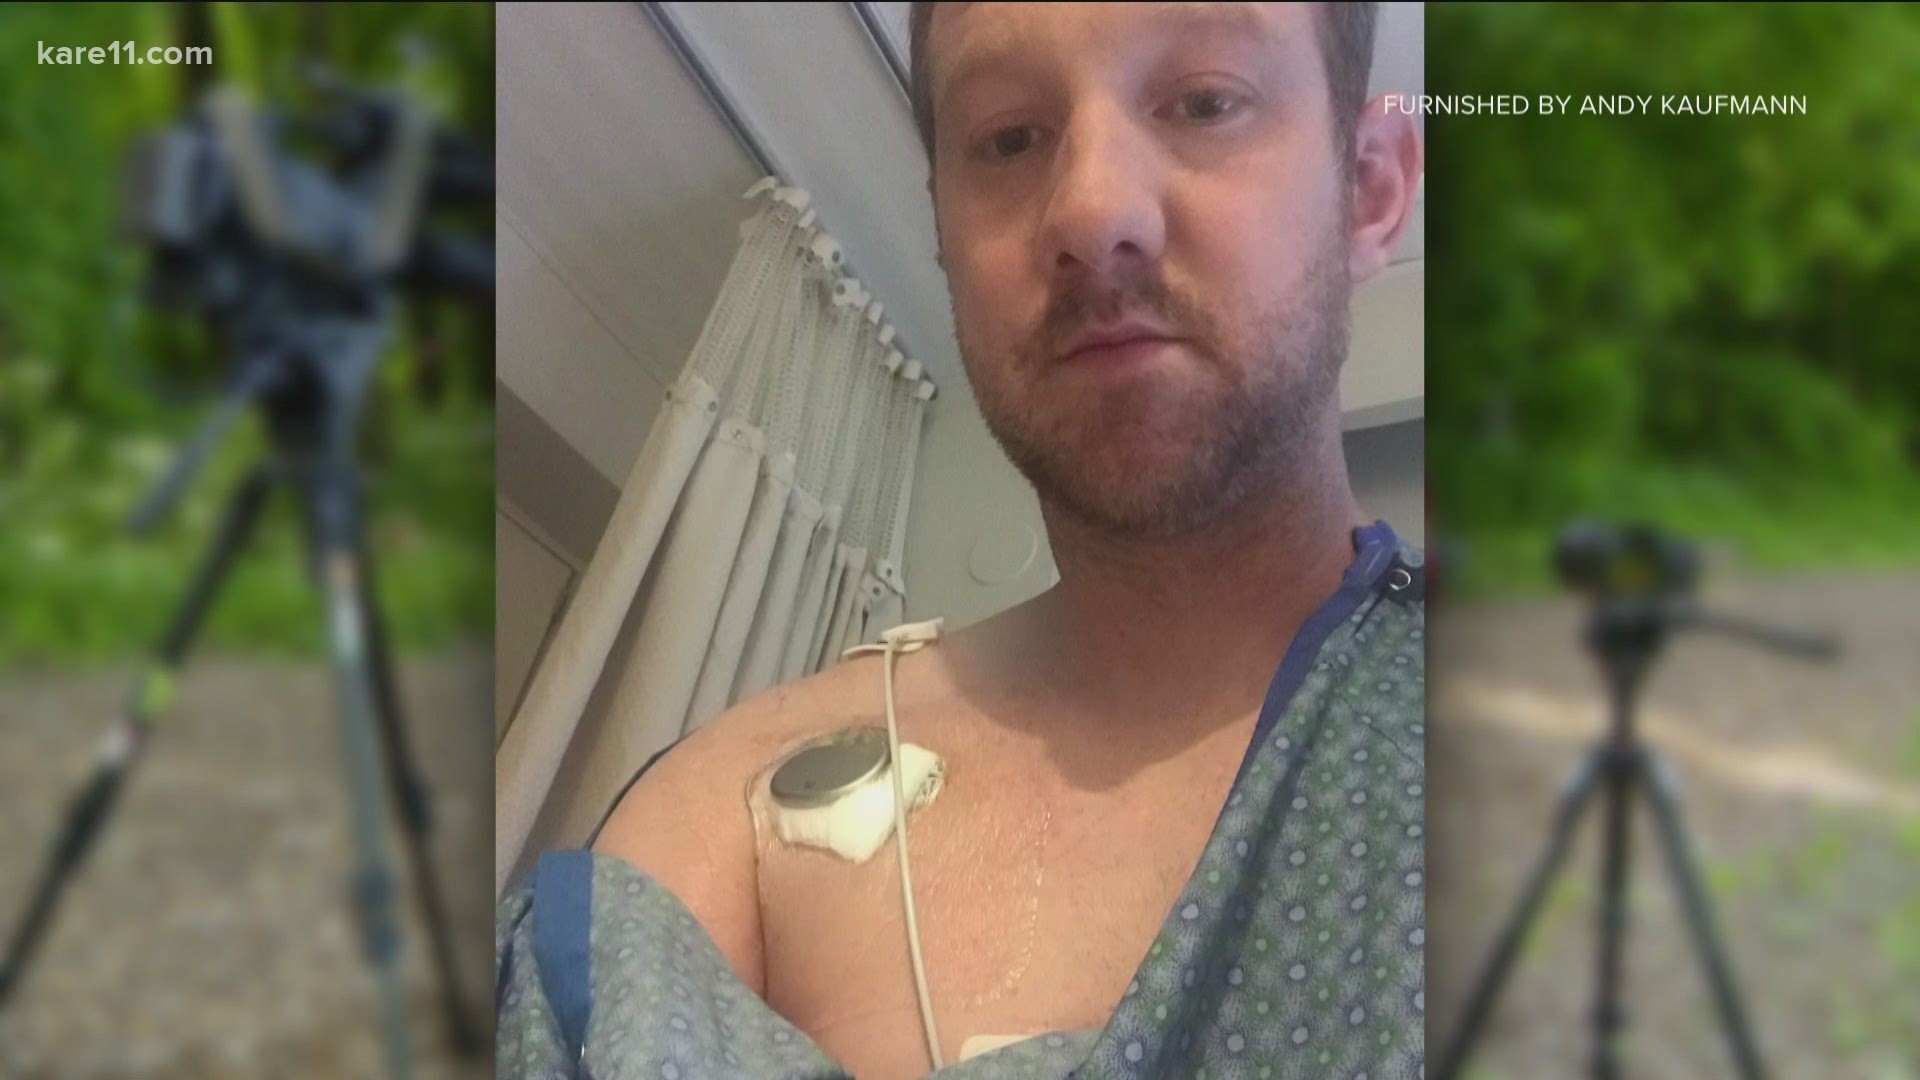 A Minneapolis fire fighter says he's lucky to be alive after Lyme disease nearly stopped his heart last year.